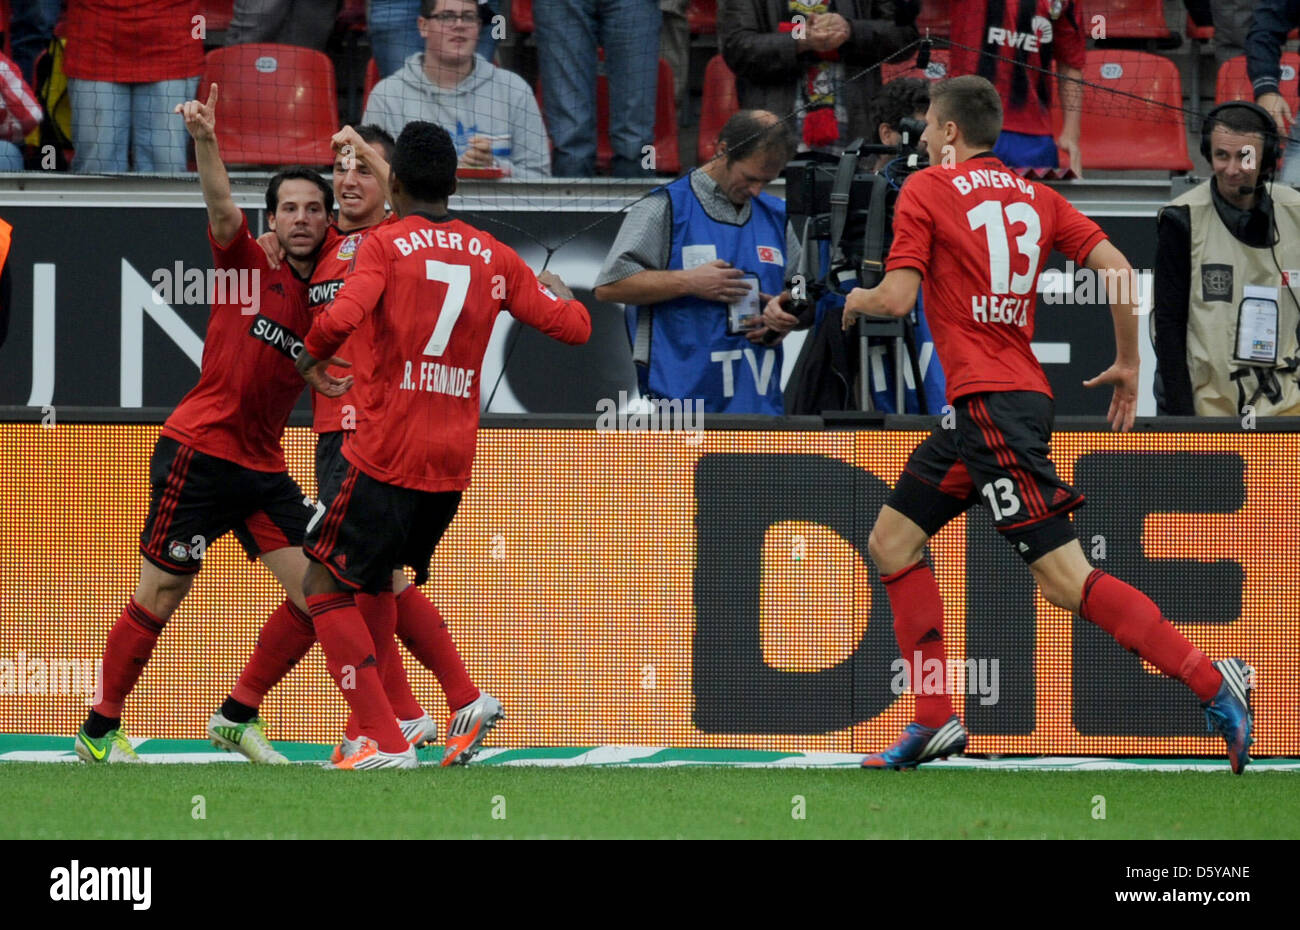 Leverkusen's Gonzalo Castro (L-R), Okan Aydin, Junior Fernandes and Jens Hegeler celebrate during the German Bundesliga match between Bayer Leverkusen and FSV Mainz 05 at BayArena in Leverkusen, Germany, 20 October 2012. The match ended 2-2. Photo: Daniel Naupold  (ATTENTION: EMBARGO CONDITIONS! The DFL permits the further utilisation of up to 15 pictures only (no sequntial picture Stock Photo